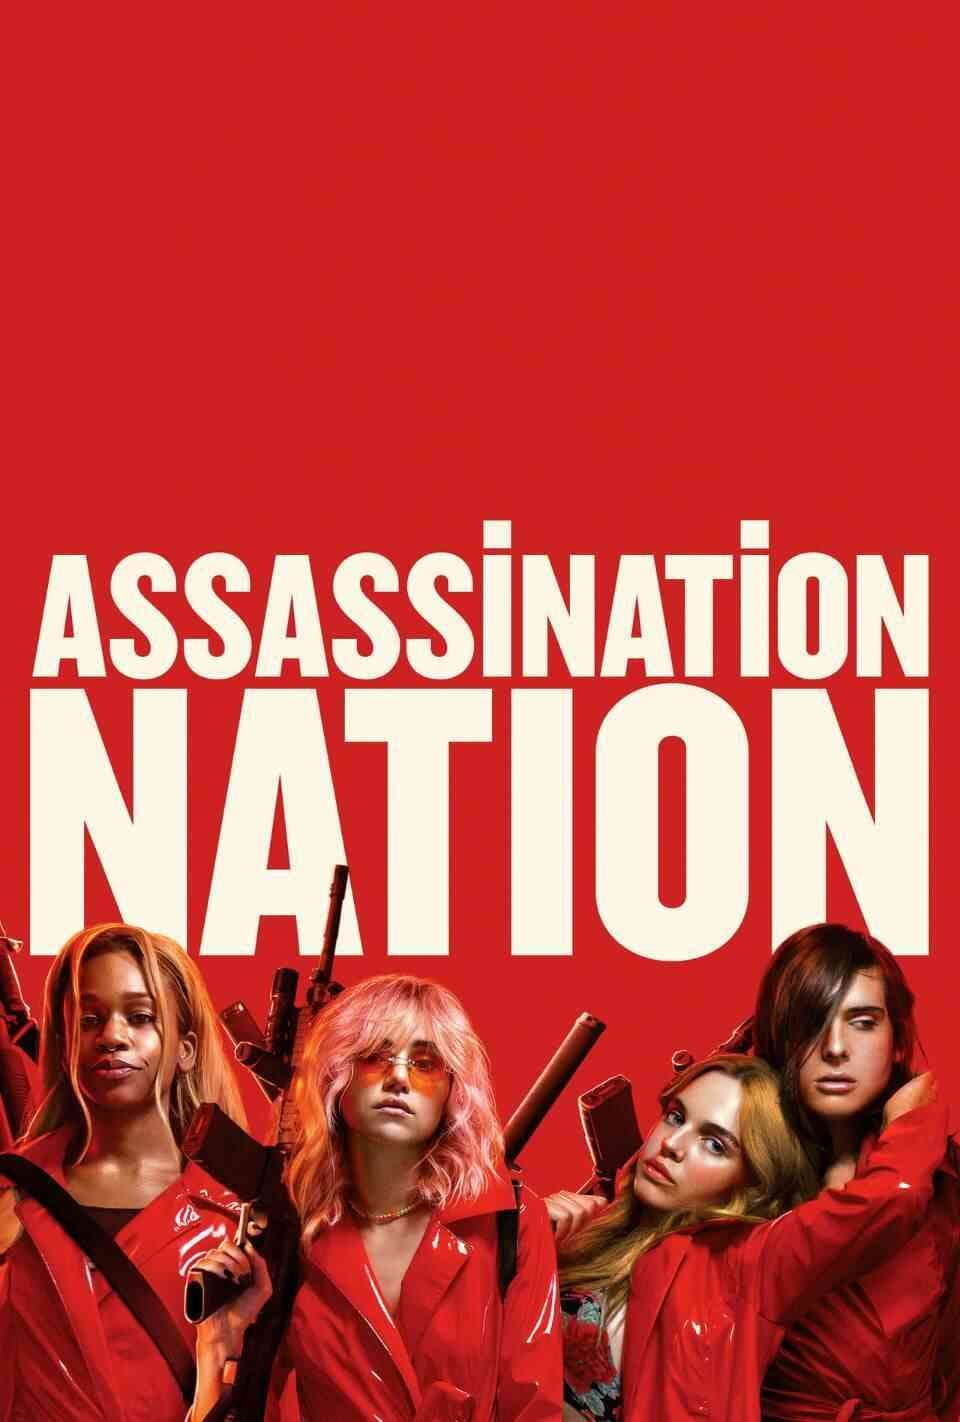 Read Assassination Nation screenplay (poster)